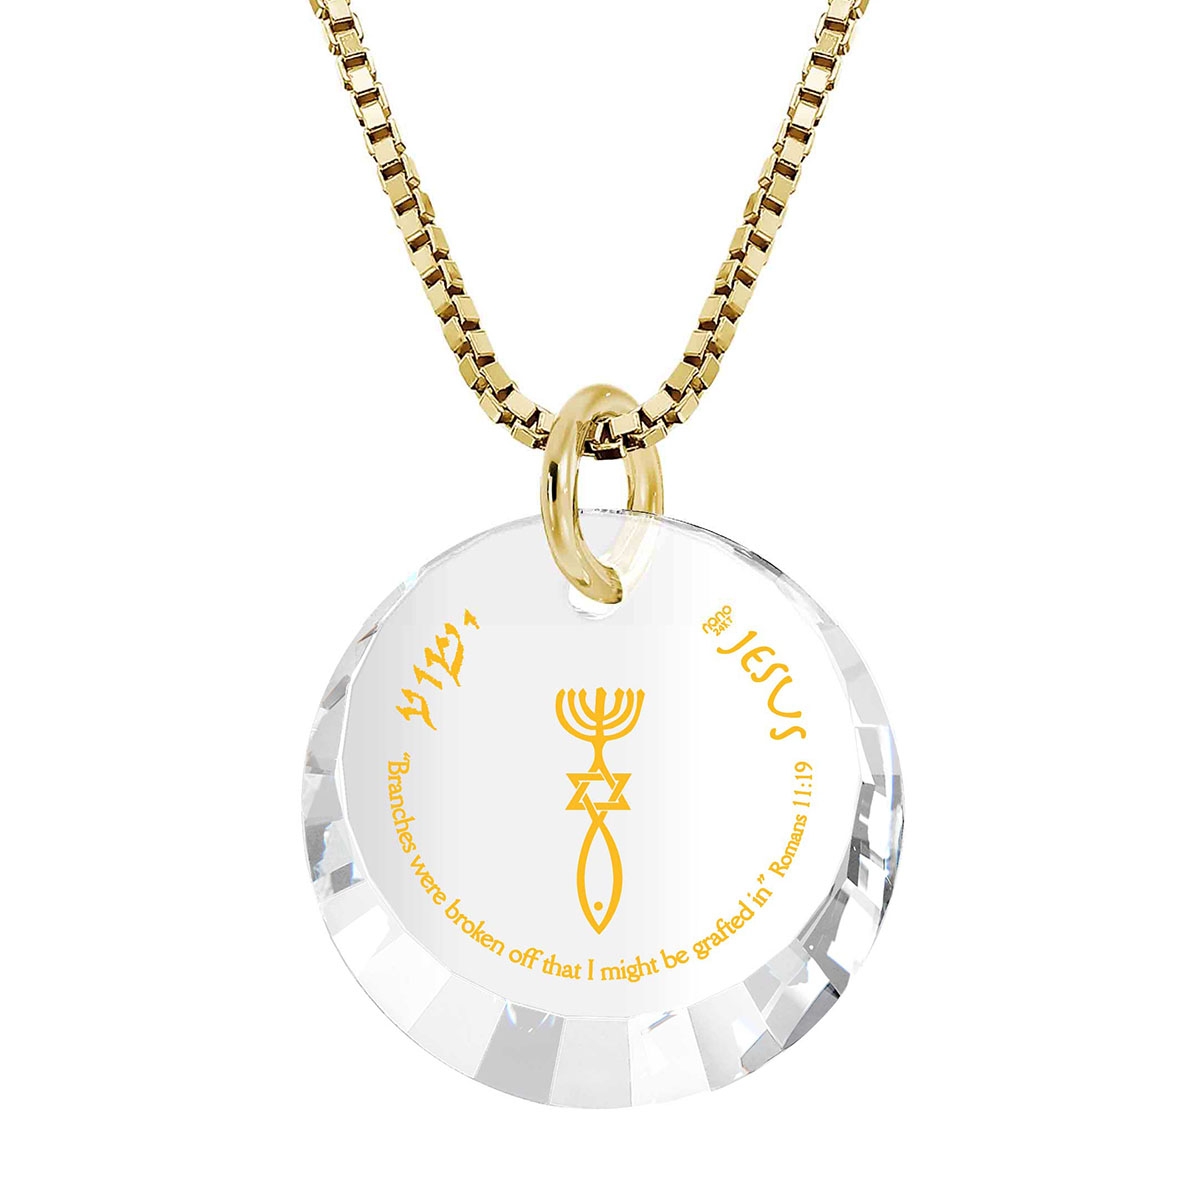 Nano Jewelry 24k Gold Plated & Gemstone Grafted-In Necklace with 24k Gold Micro-Inscription - Choice of Color - 1